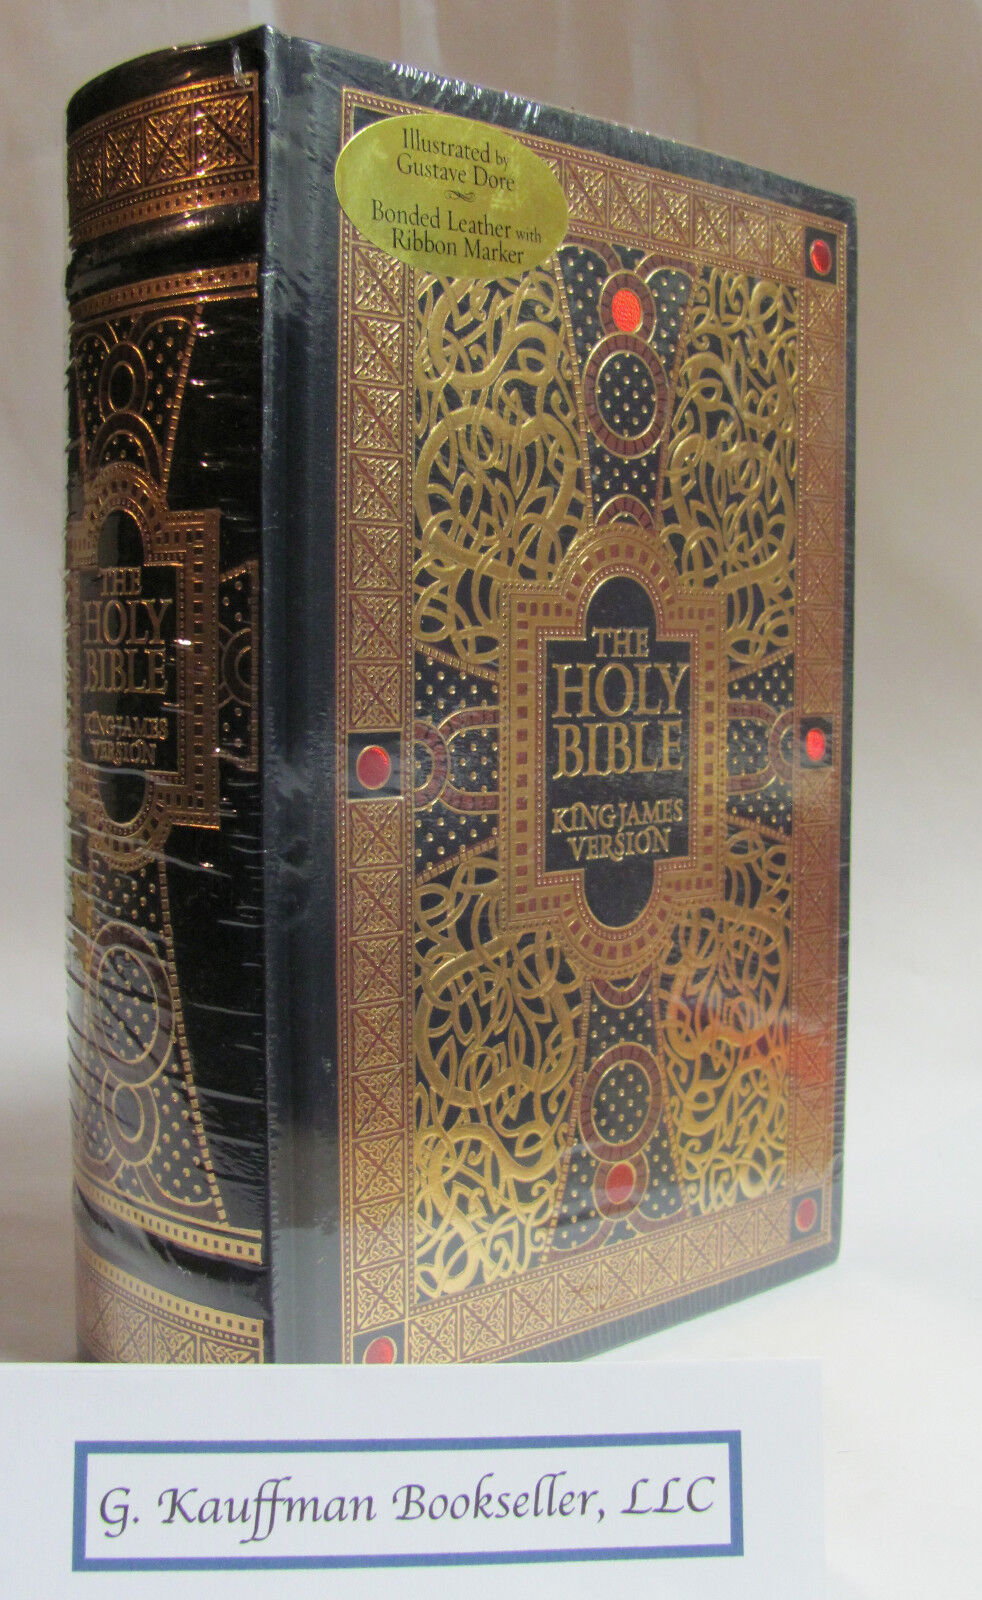 Gustave Dore 'THE HOLY BIBLE KING JAMES VERSION' Brand New LEATHER BOUND Sealed